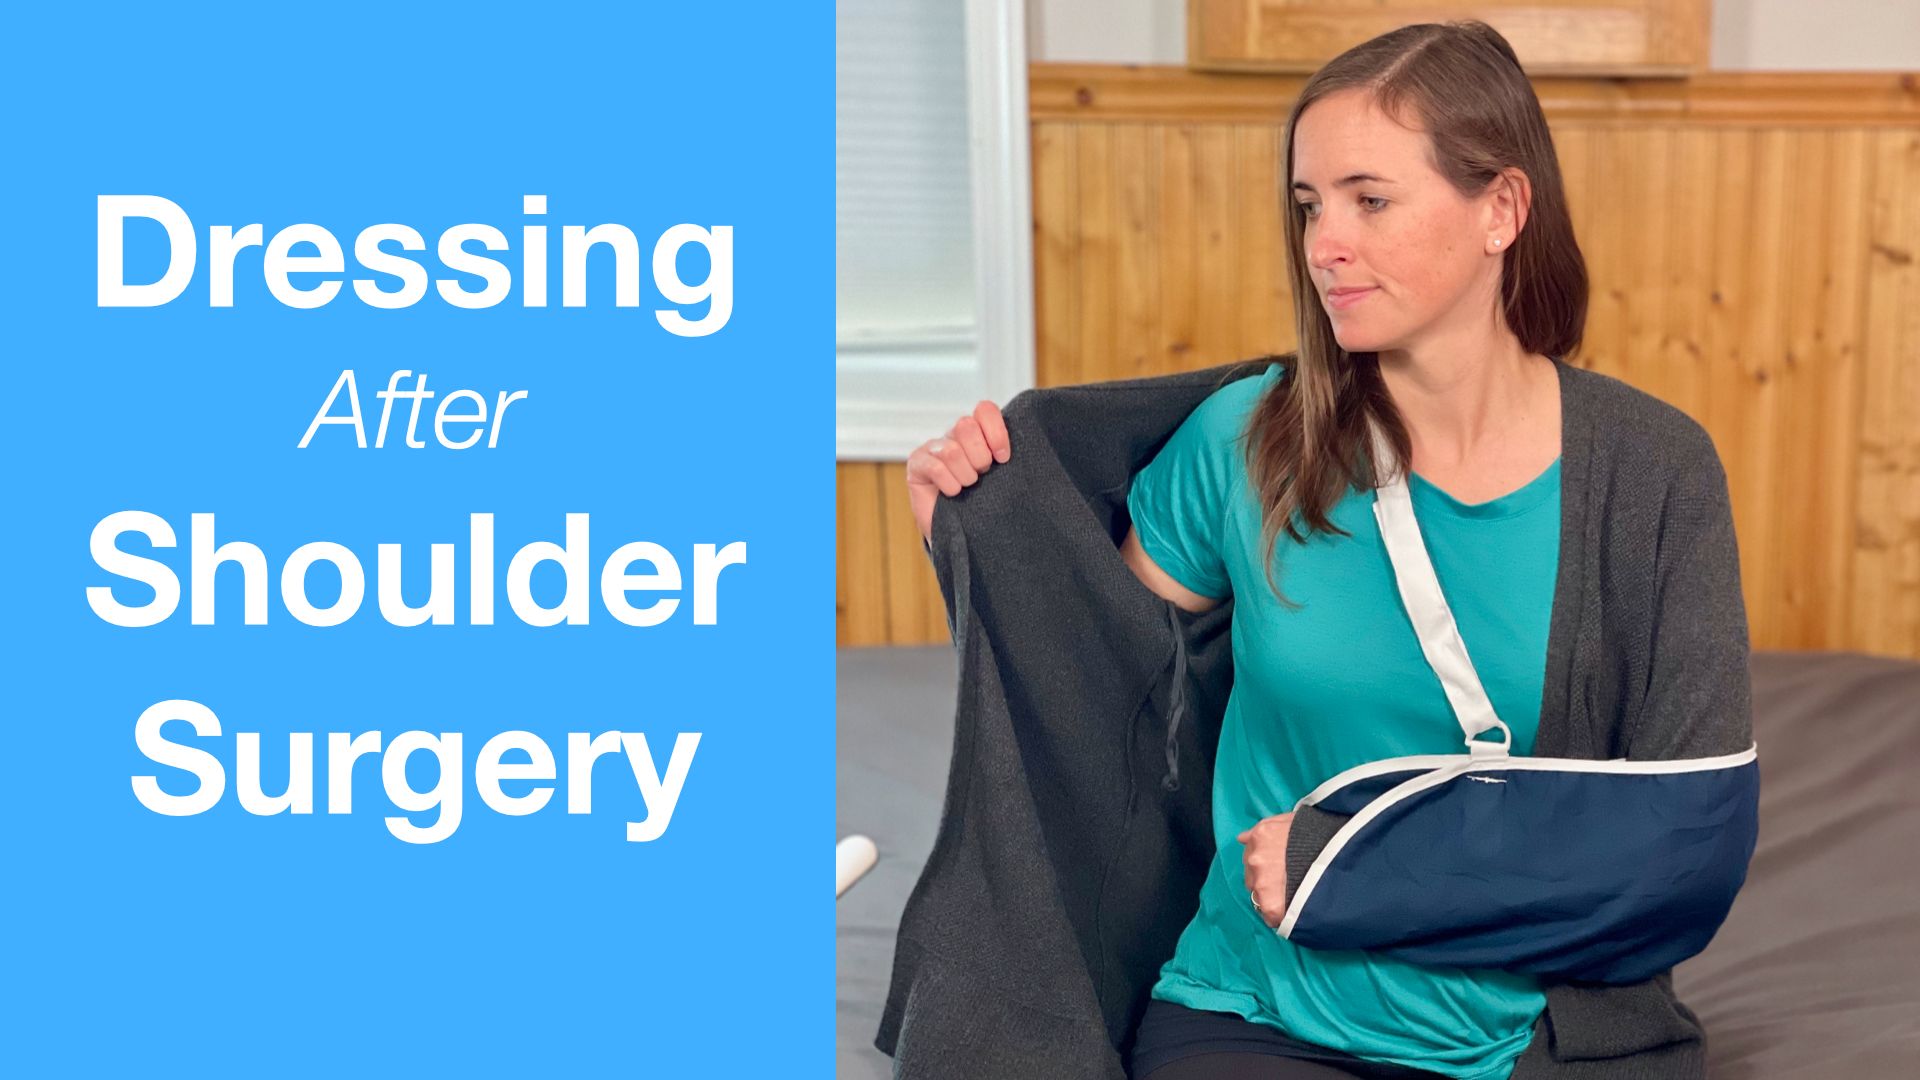 Shoulder Surgery: What to Wear